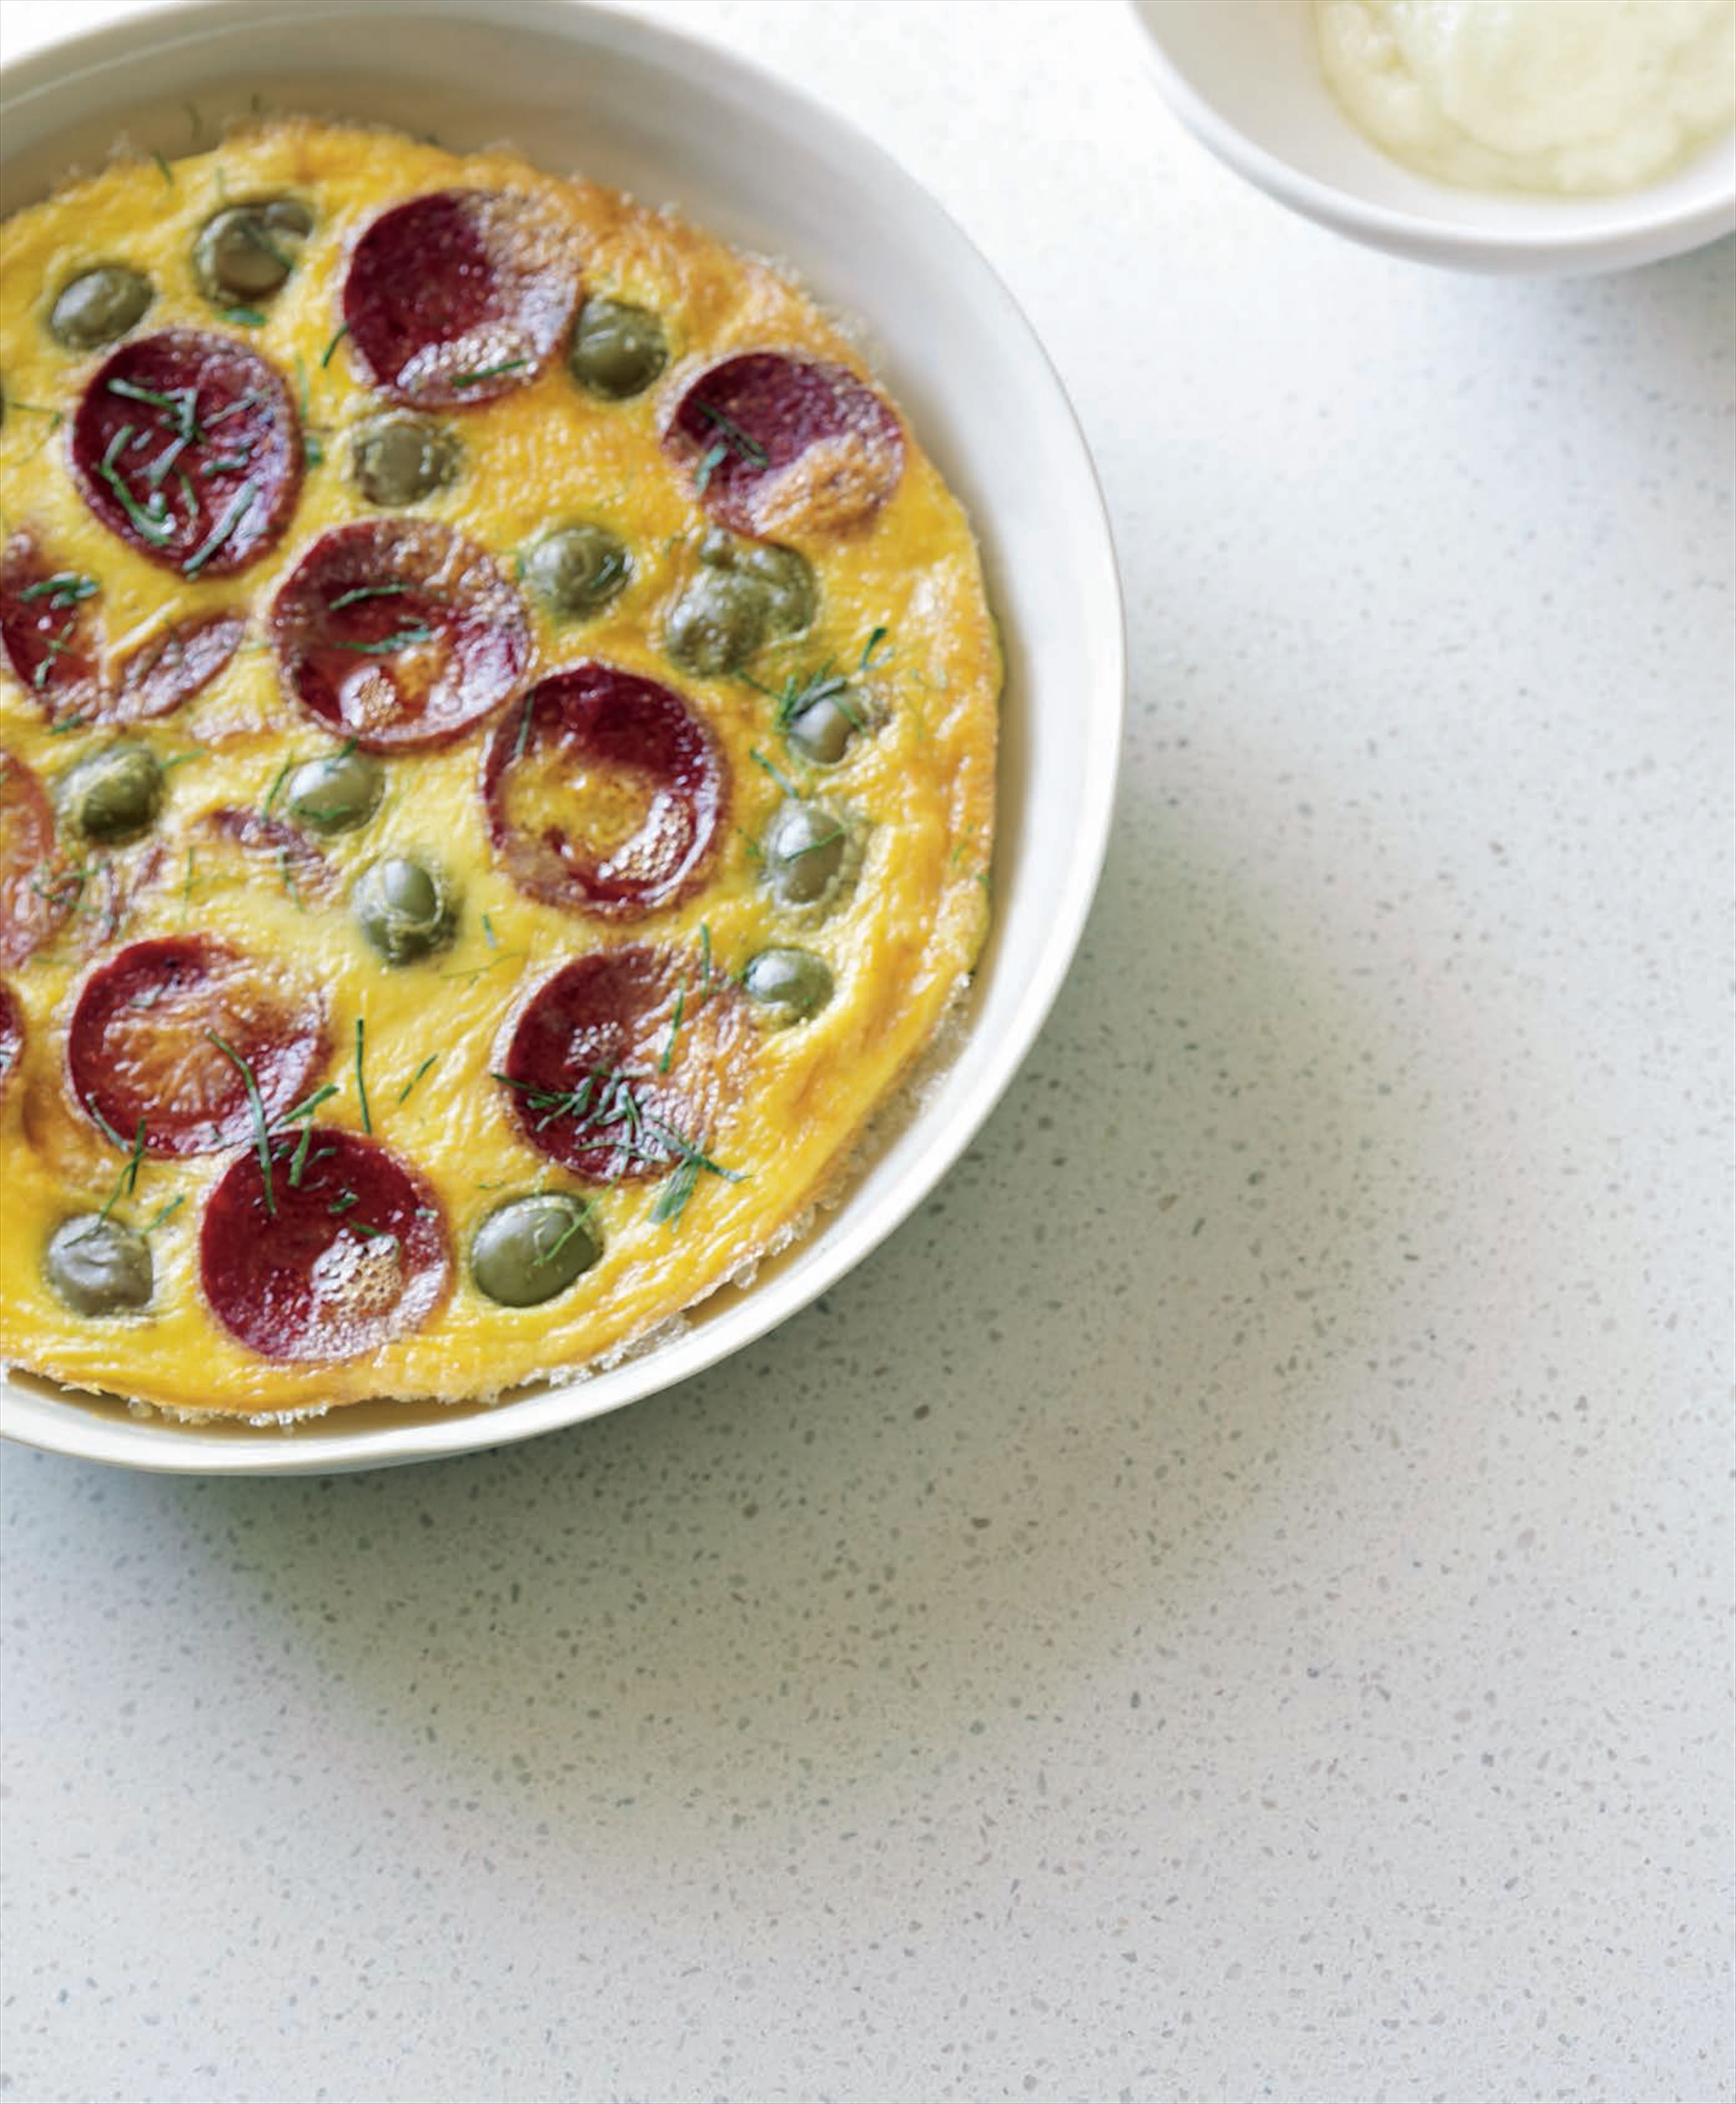 Spanish omelette with potato, green olives and chorizo